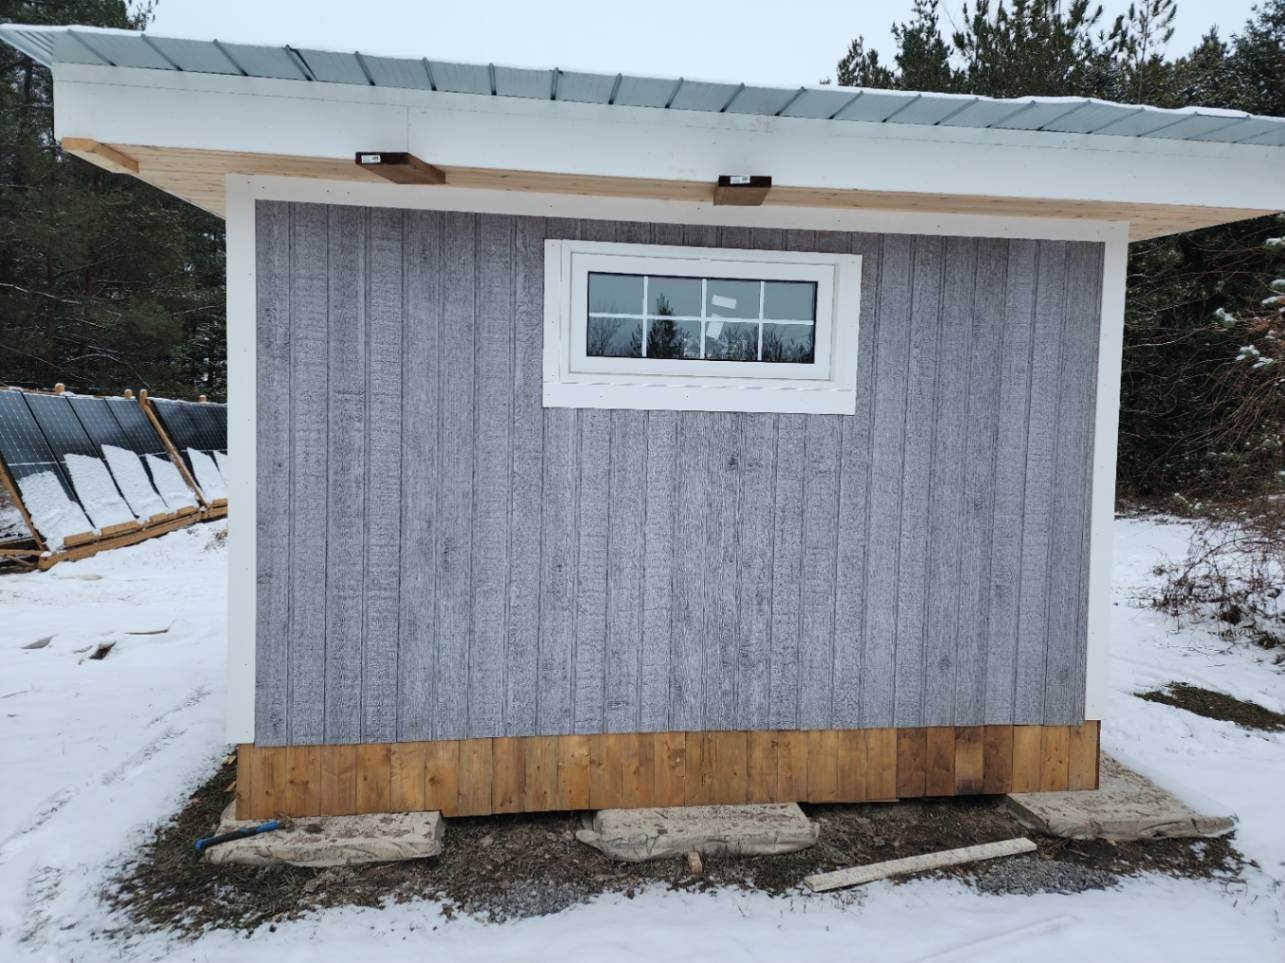 Rear view of 10' x 12' Urban Studio located in Stayner, Ontario – Summerwood Products